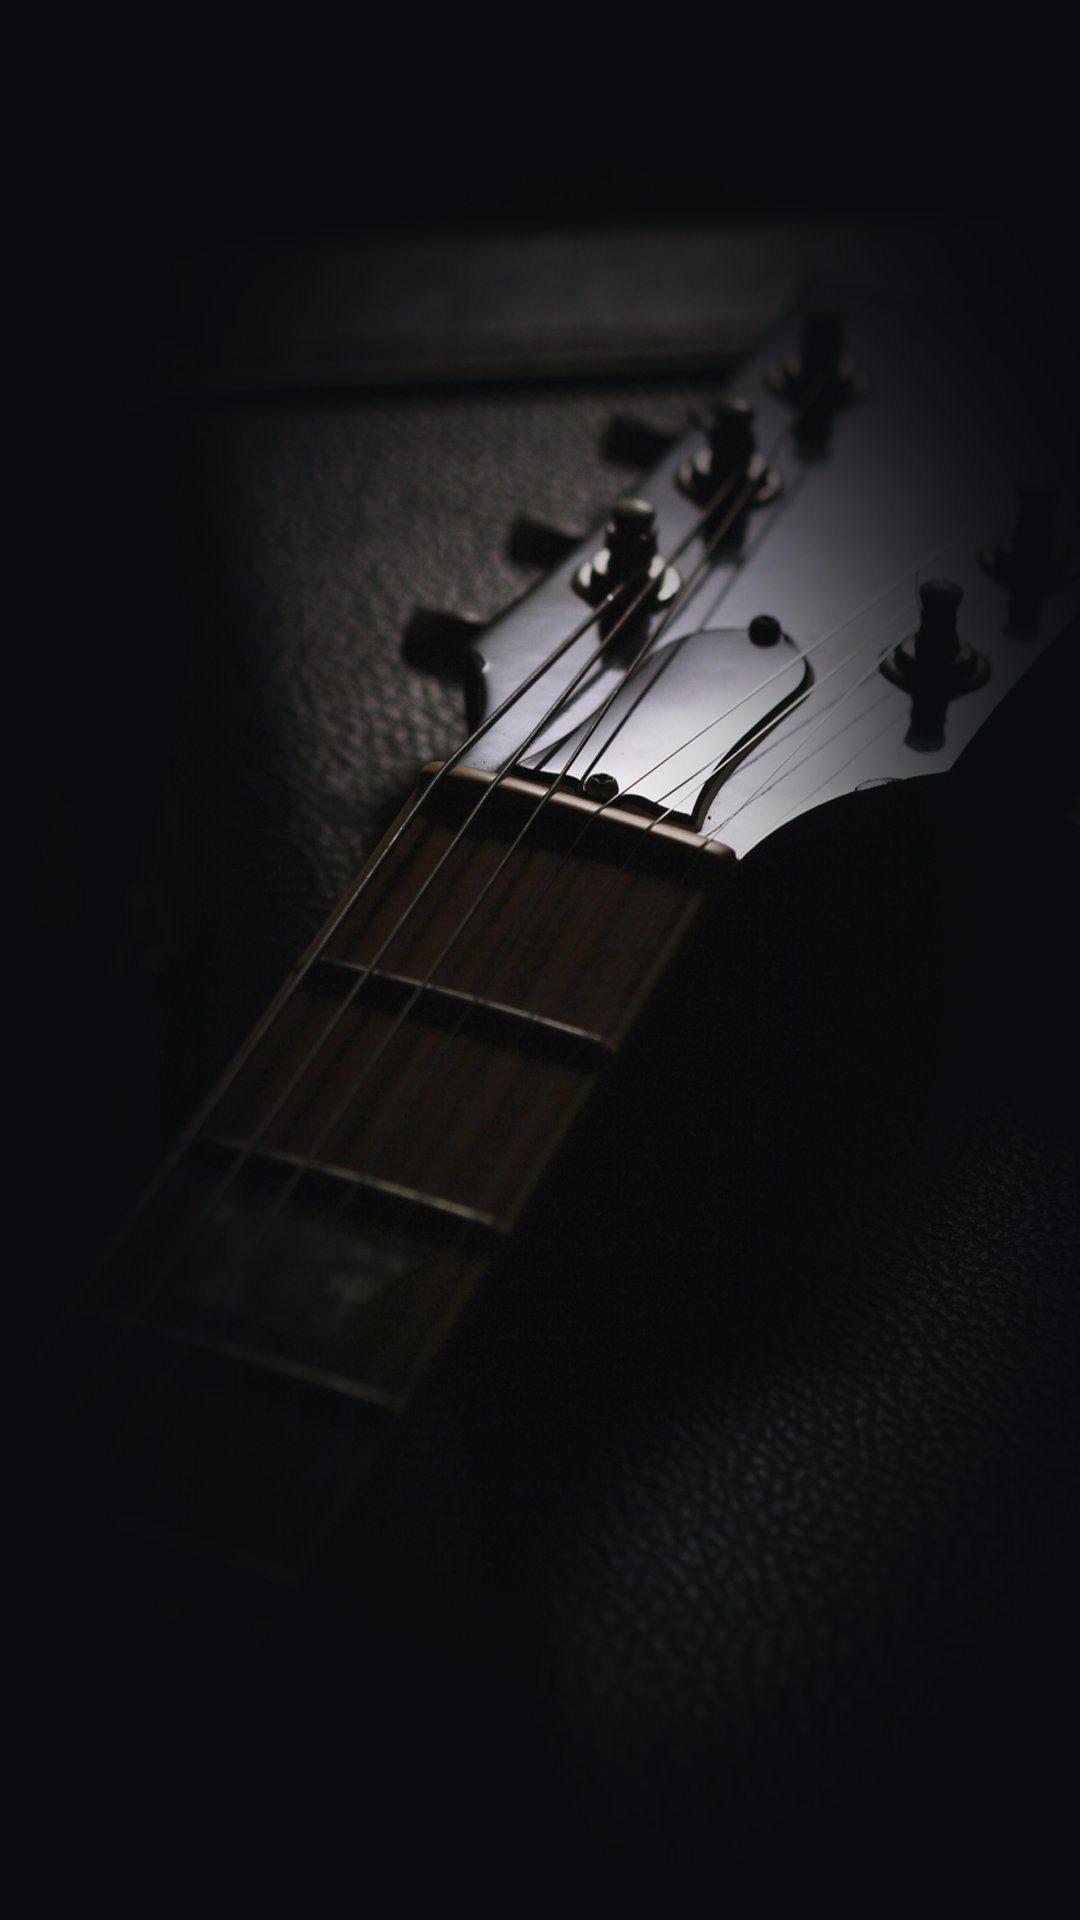 Guitarist Wallpapers, HD Guitarist Backgrounds, Free Images Download